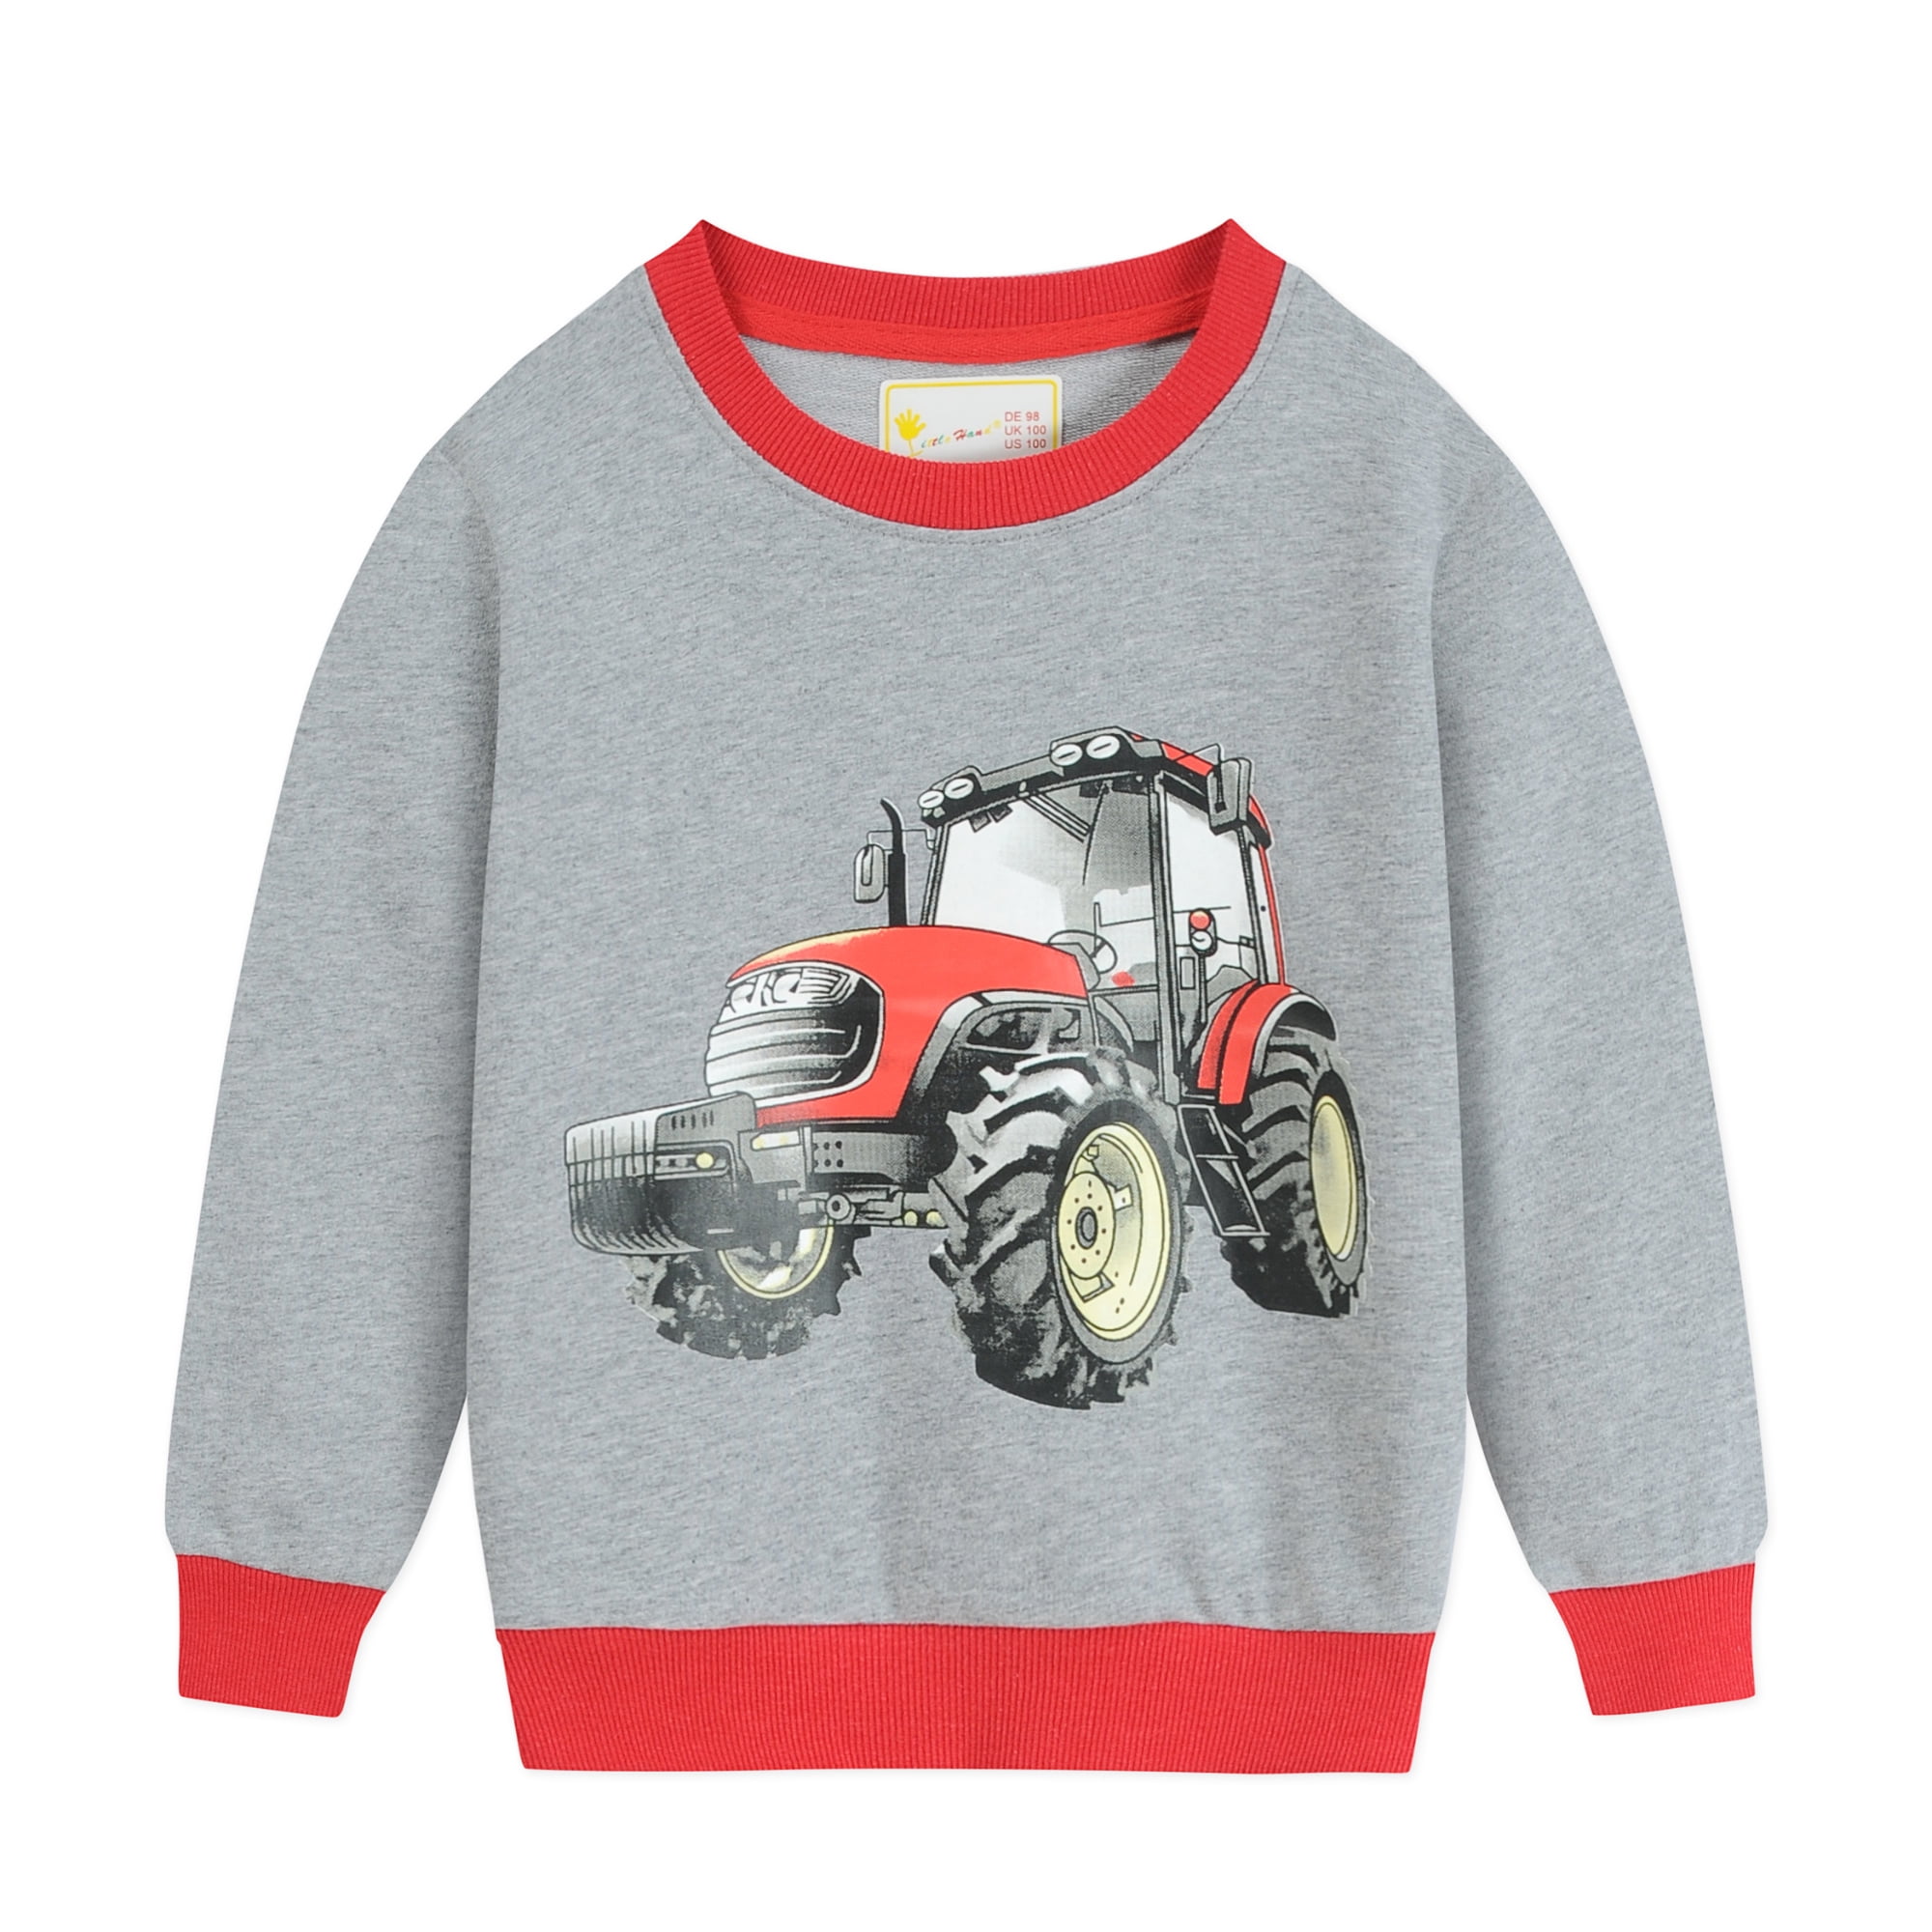 Details about   Children's Place Multi Colored Gray Blue Red Pullover Sweater Boy Sze 2T Garment 